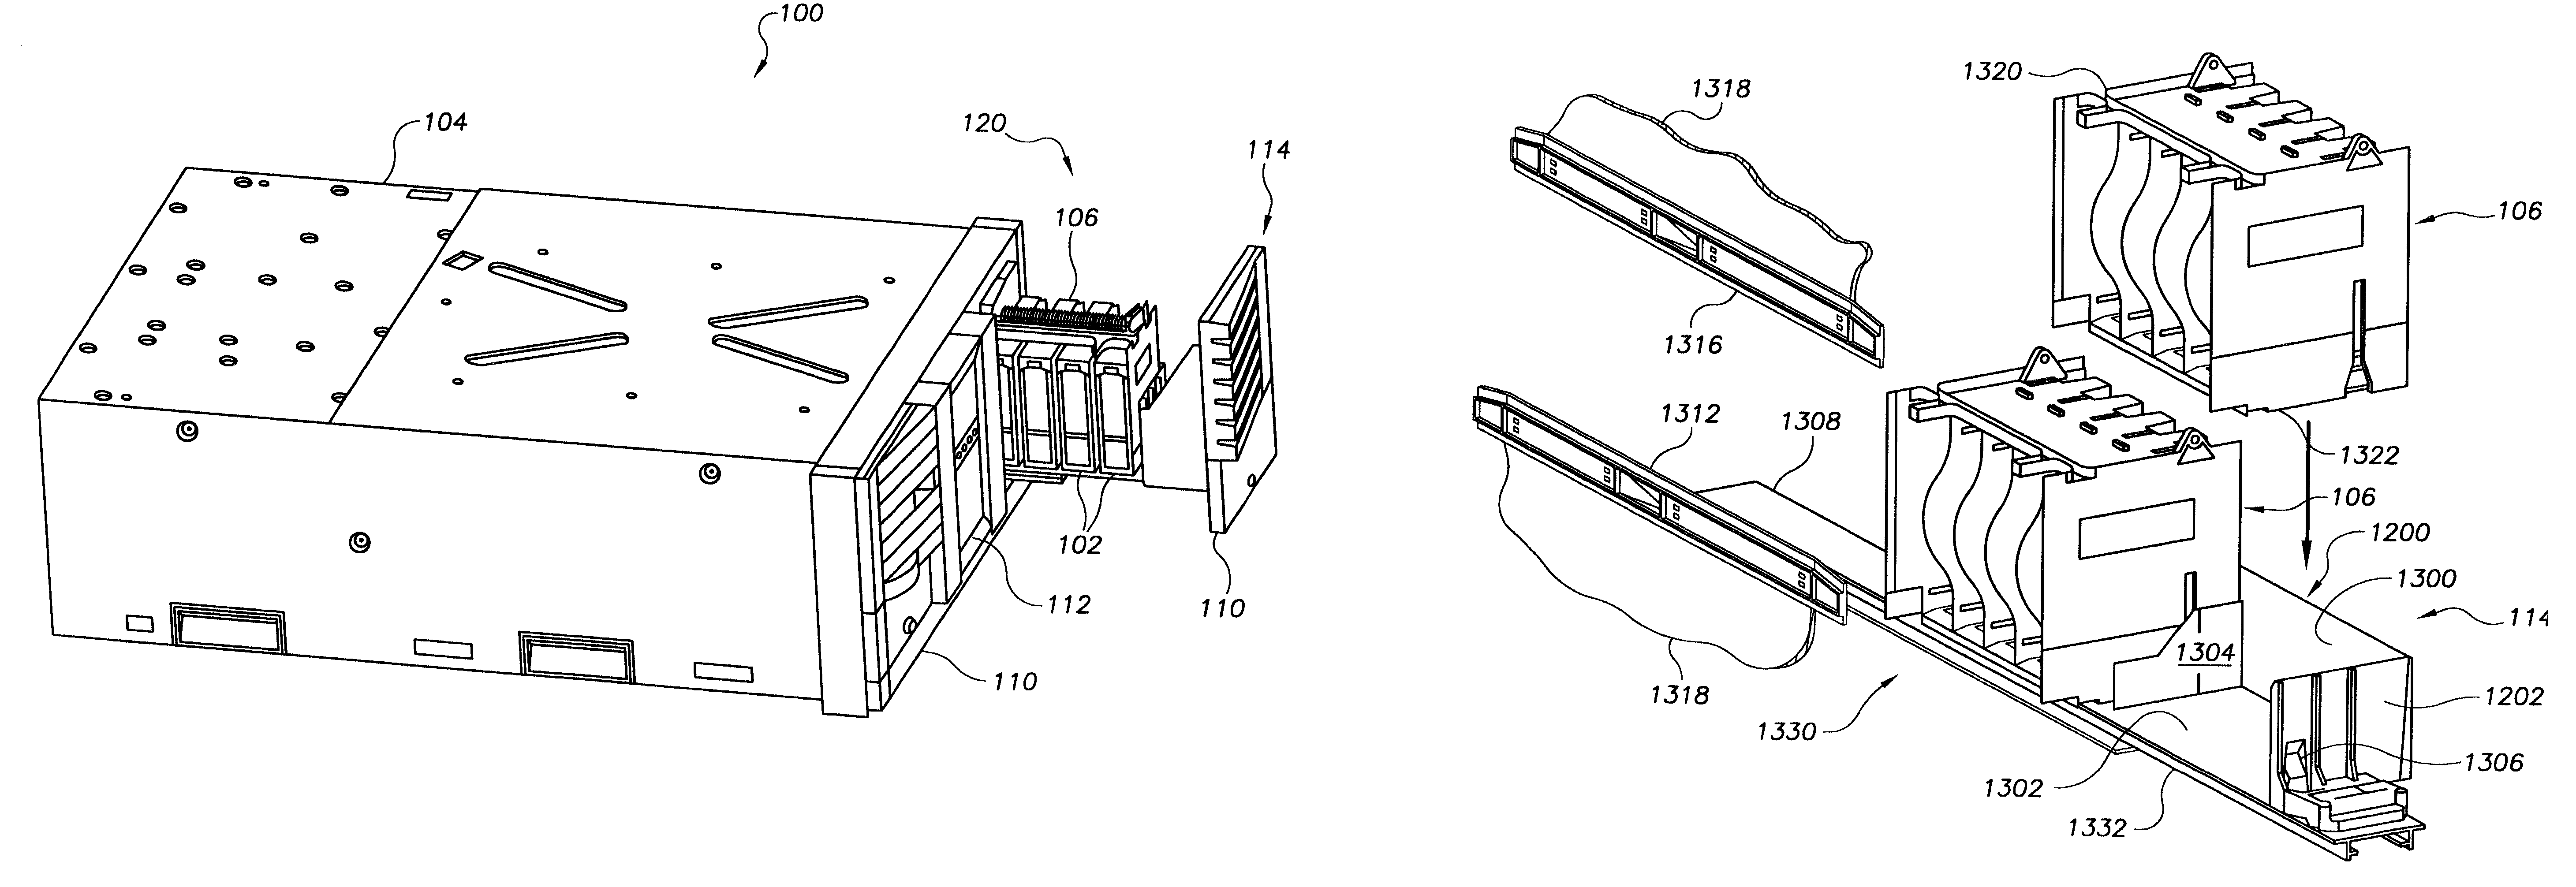 Removable media storage method and device for a data storage system